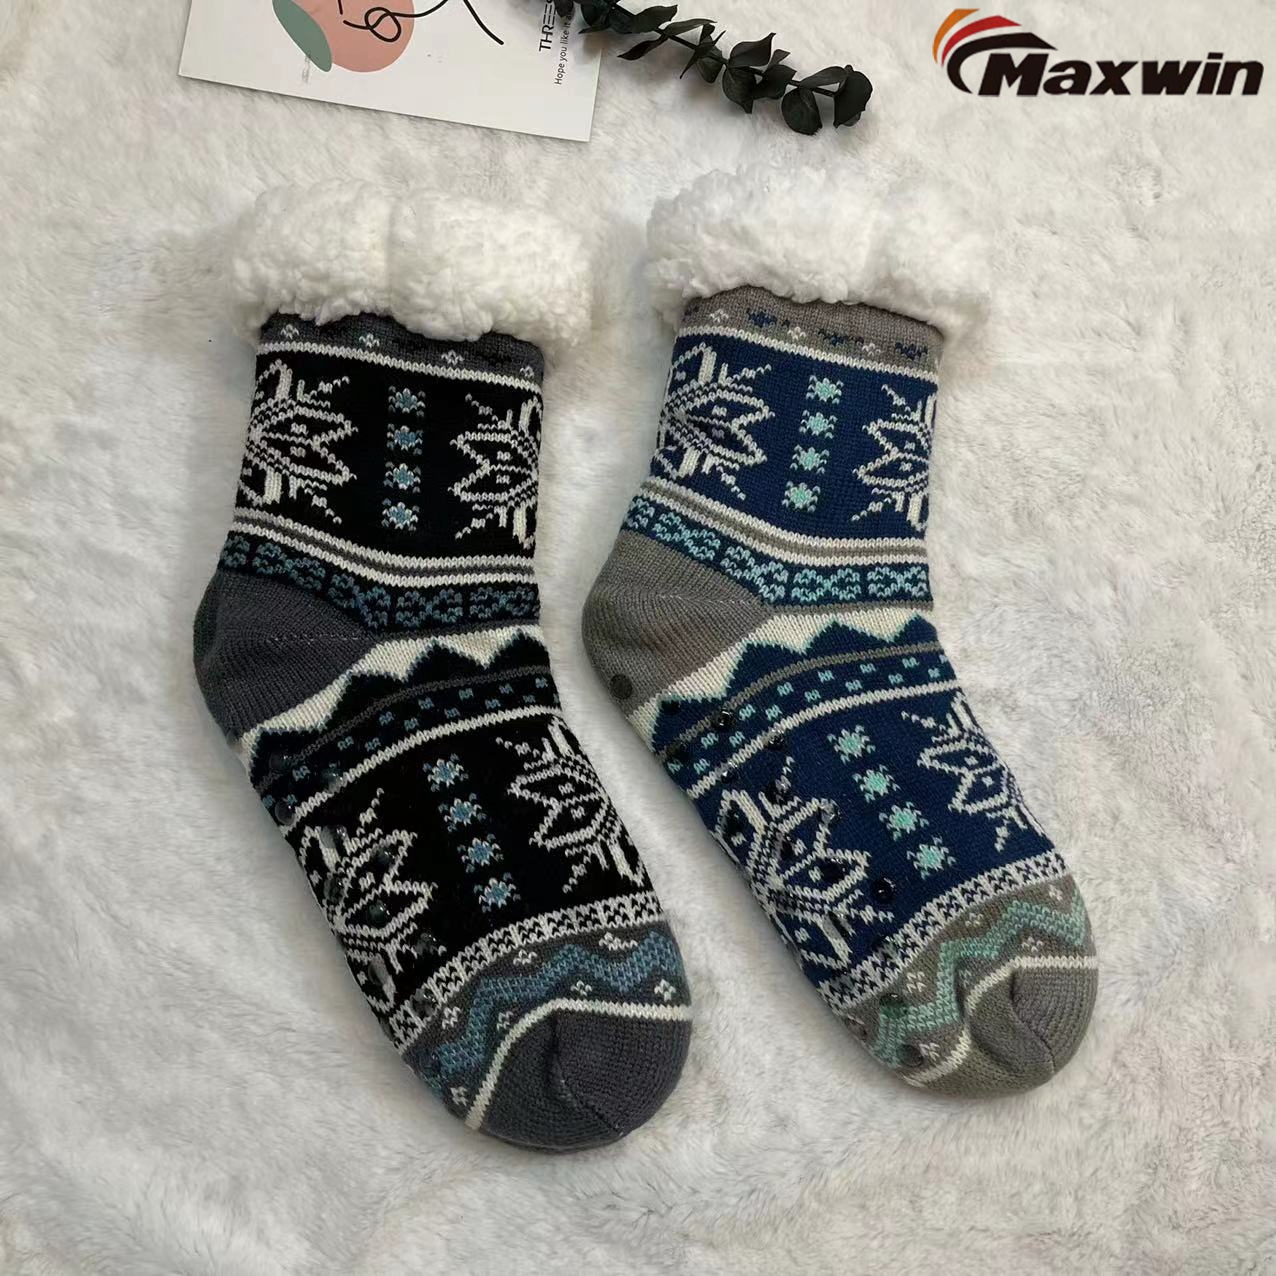 China Supplier Cute Warm Socks - Ladies Cozy Winter Socks with Snowflake Pattern  – Maxwin